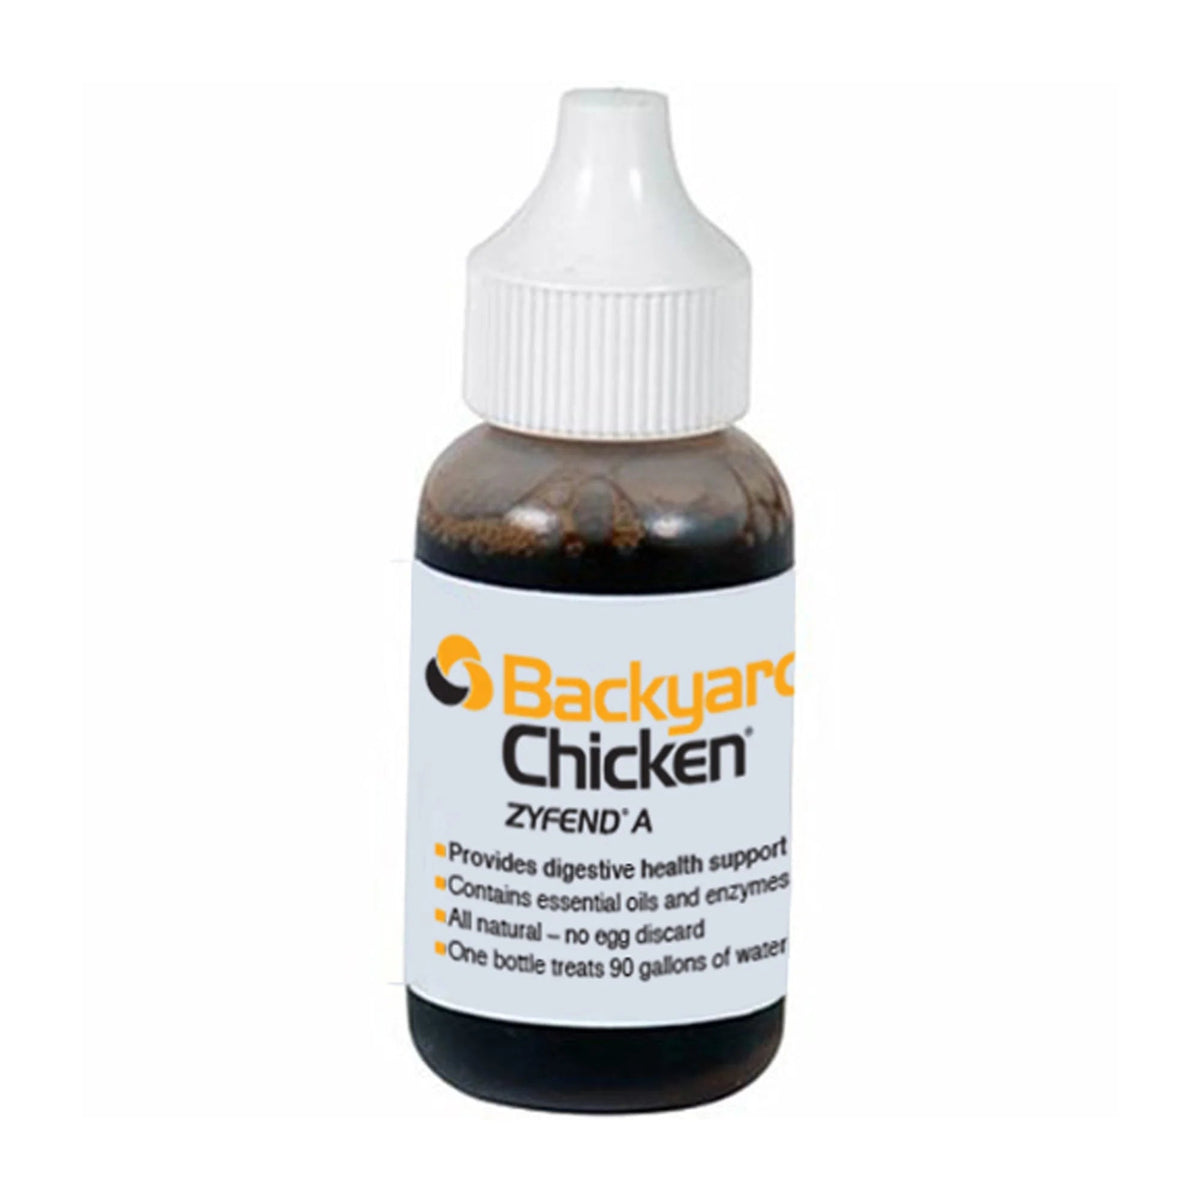 ZYFEND A (Poultry Digestive Supplement), 30 ml - The First Aid Gear Shop